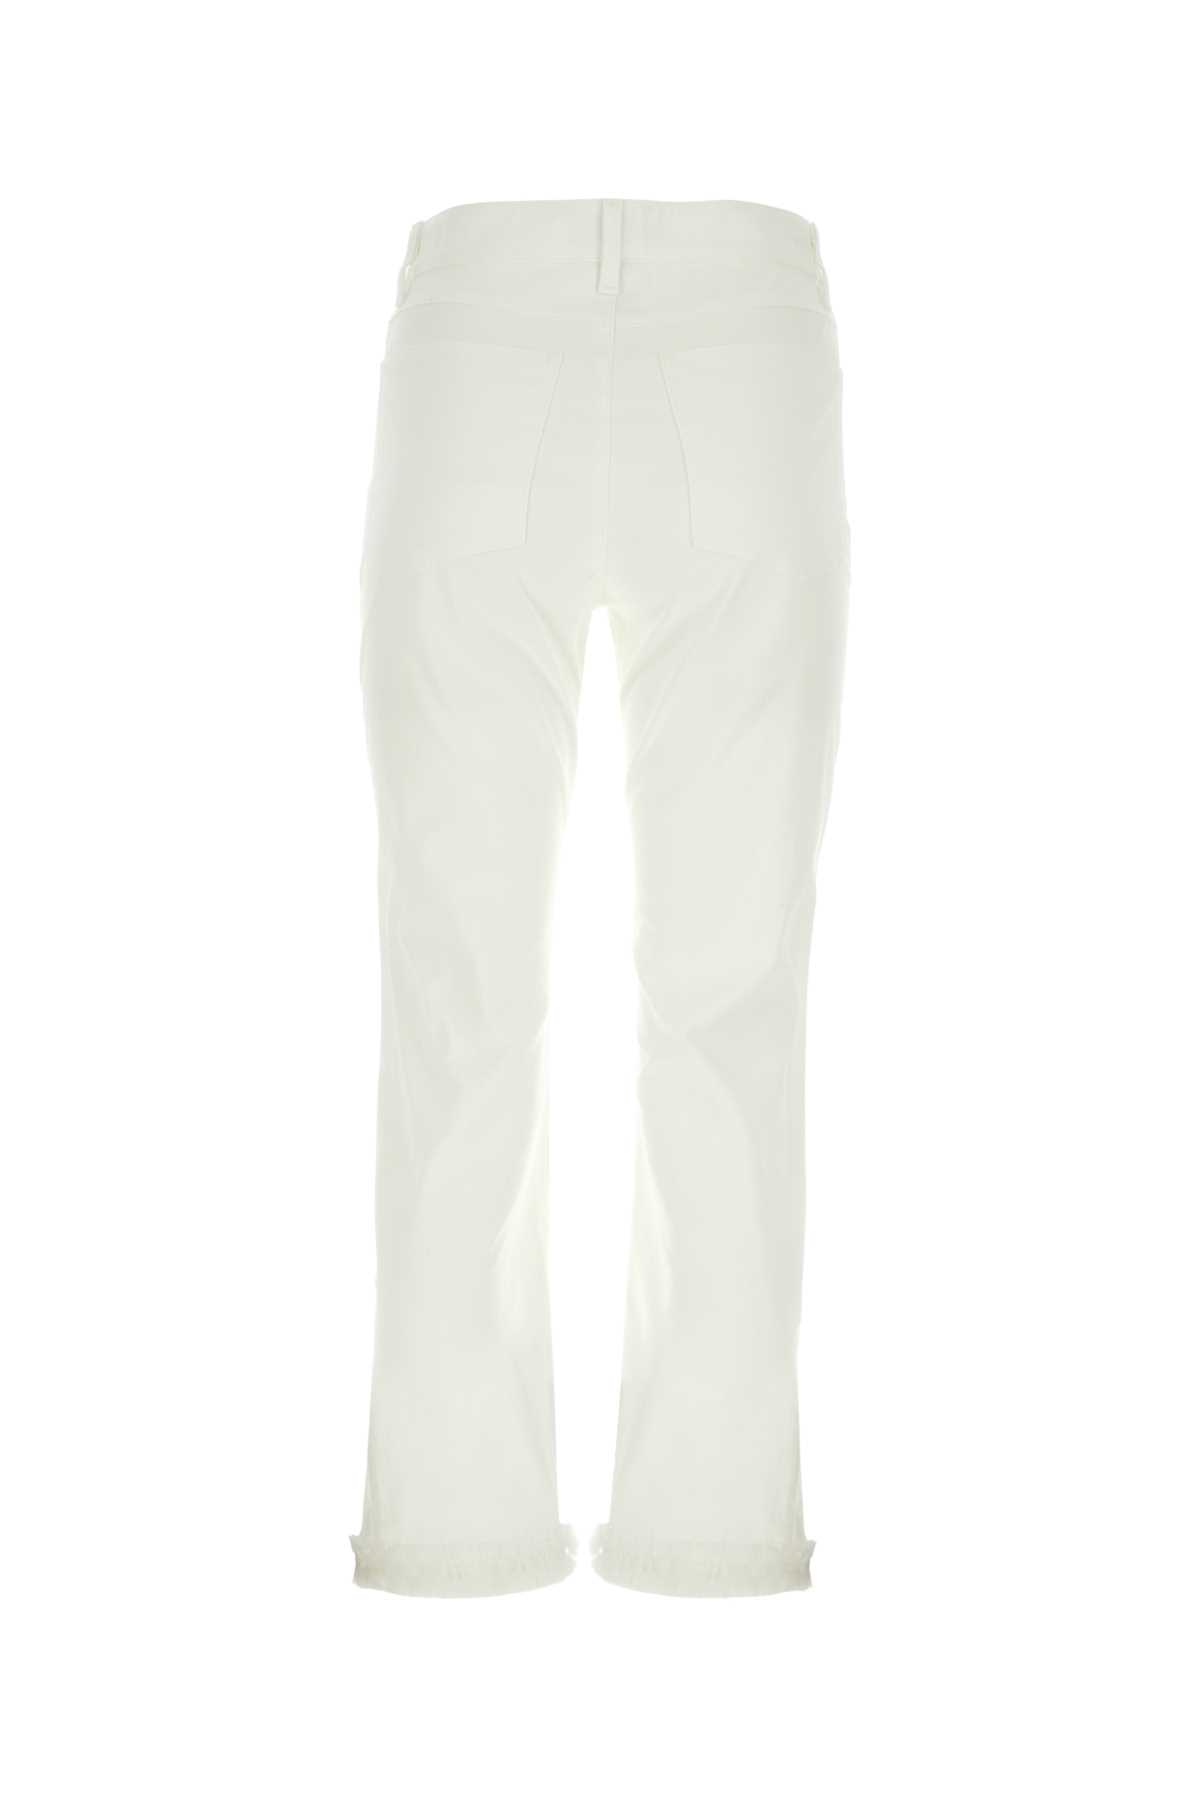 's Max Mara White Stretch Cotton Tracy Pant In 001